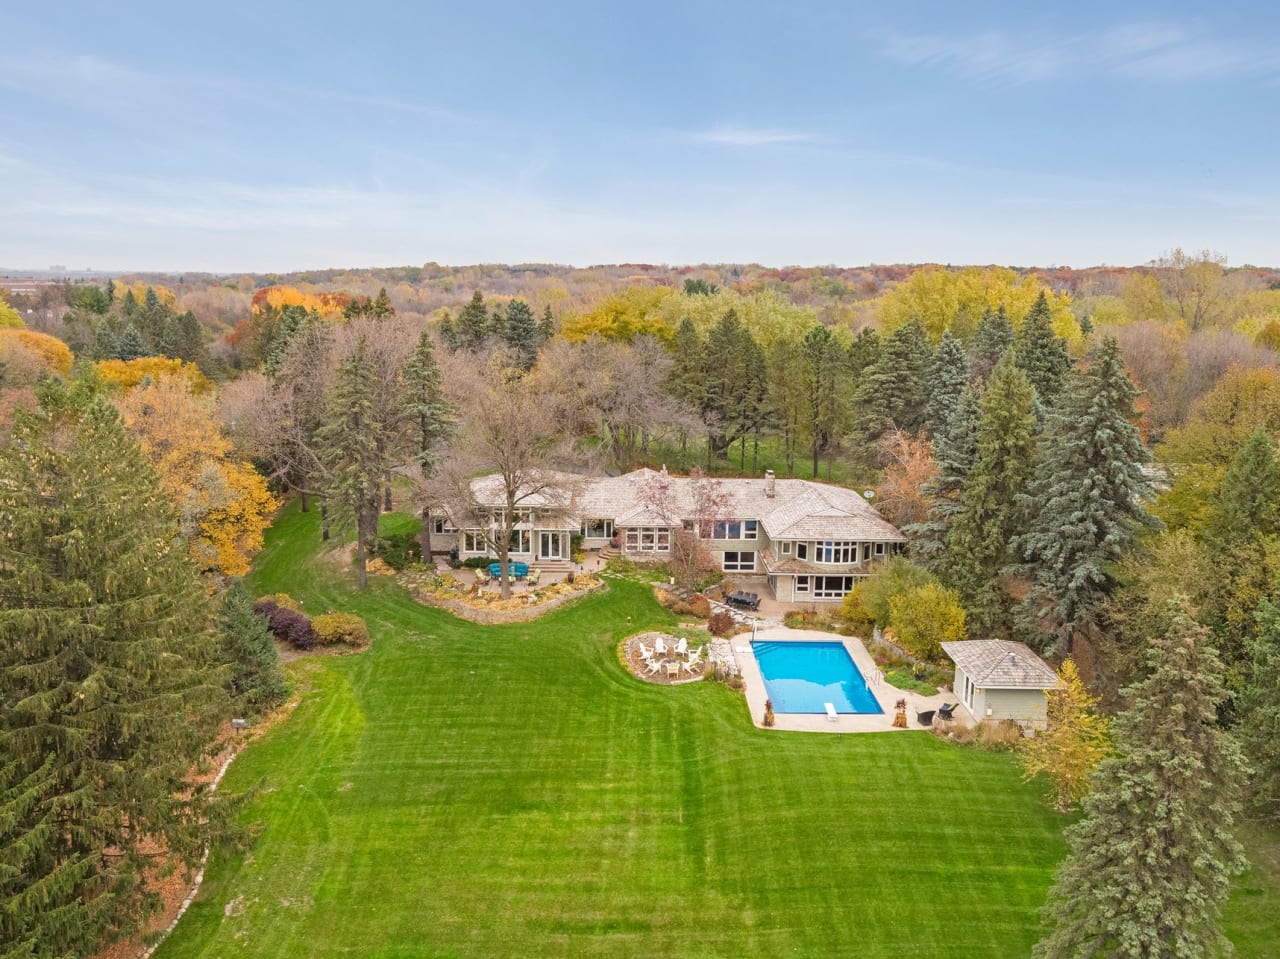 An aerial view of a large two-story house with a swimming pool, a patio, and a huge lush green yard.